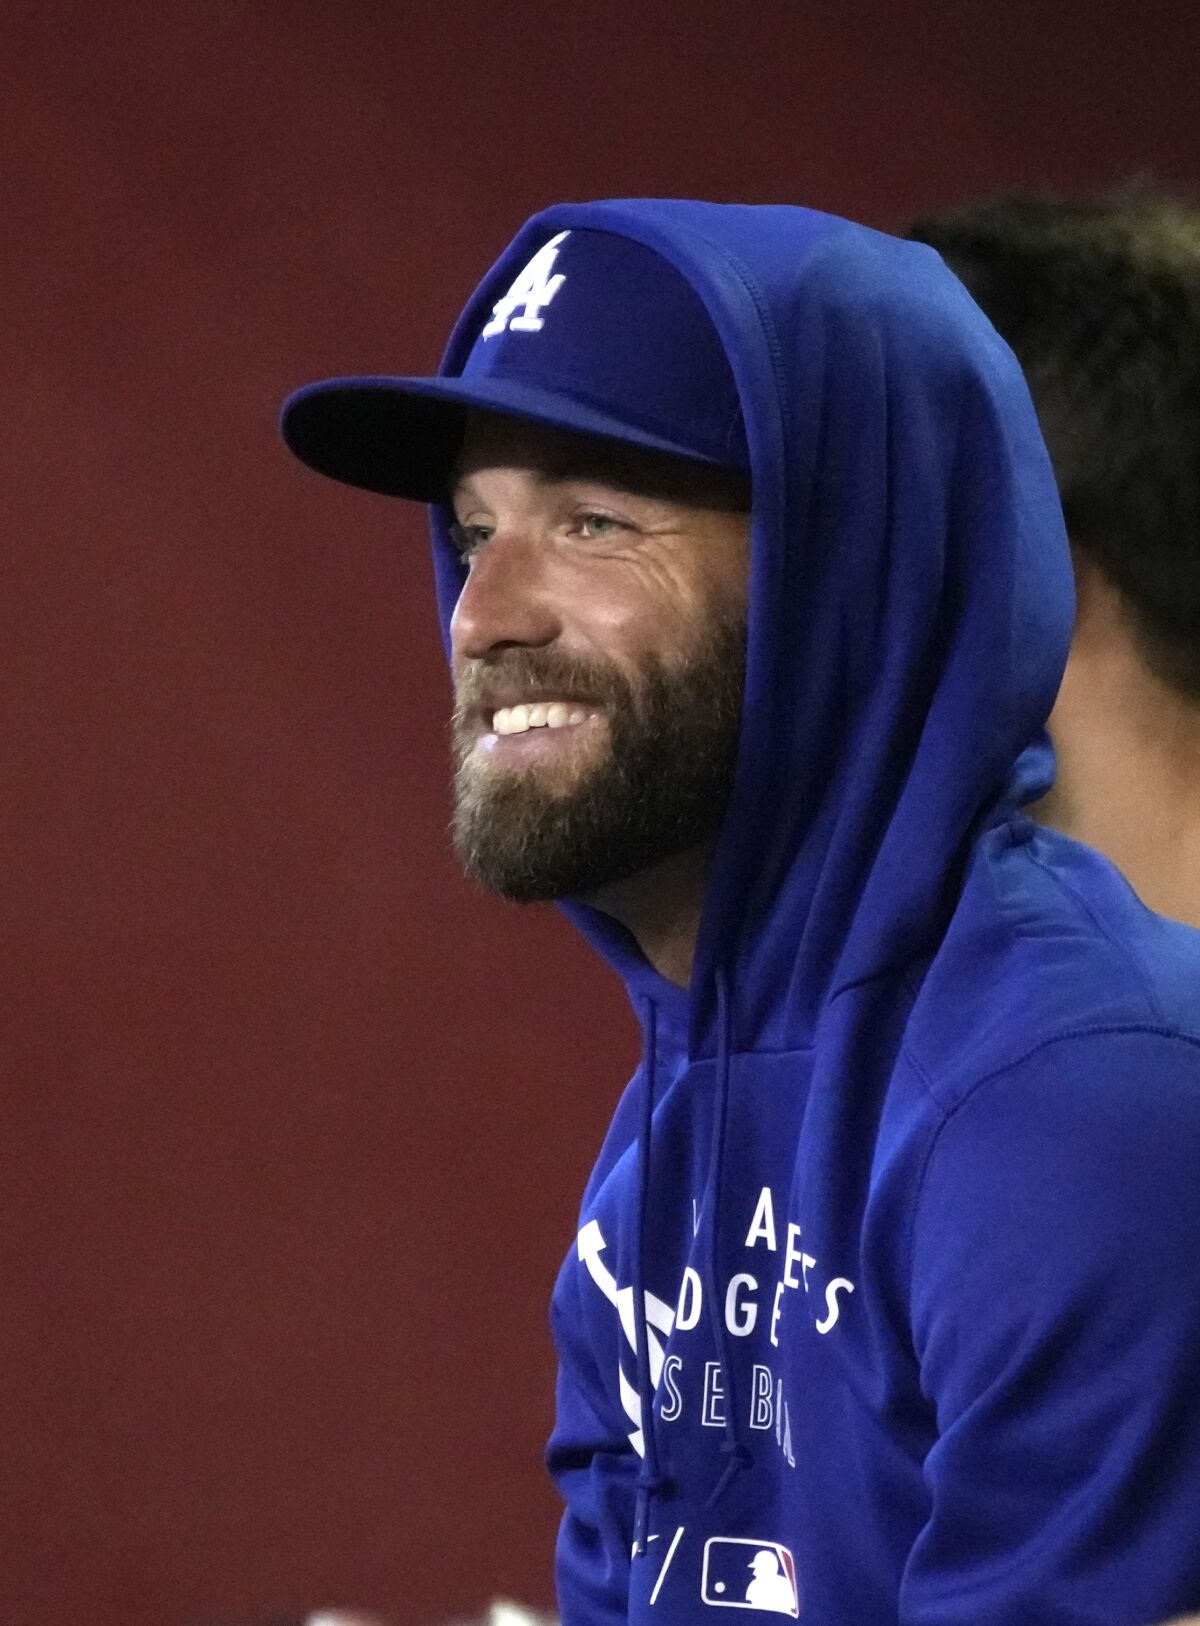 Dodgers pitcher Danny Duffy looks on during a game against the Arizona Diamondbacks on Aug. 1.